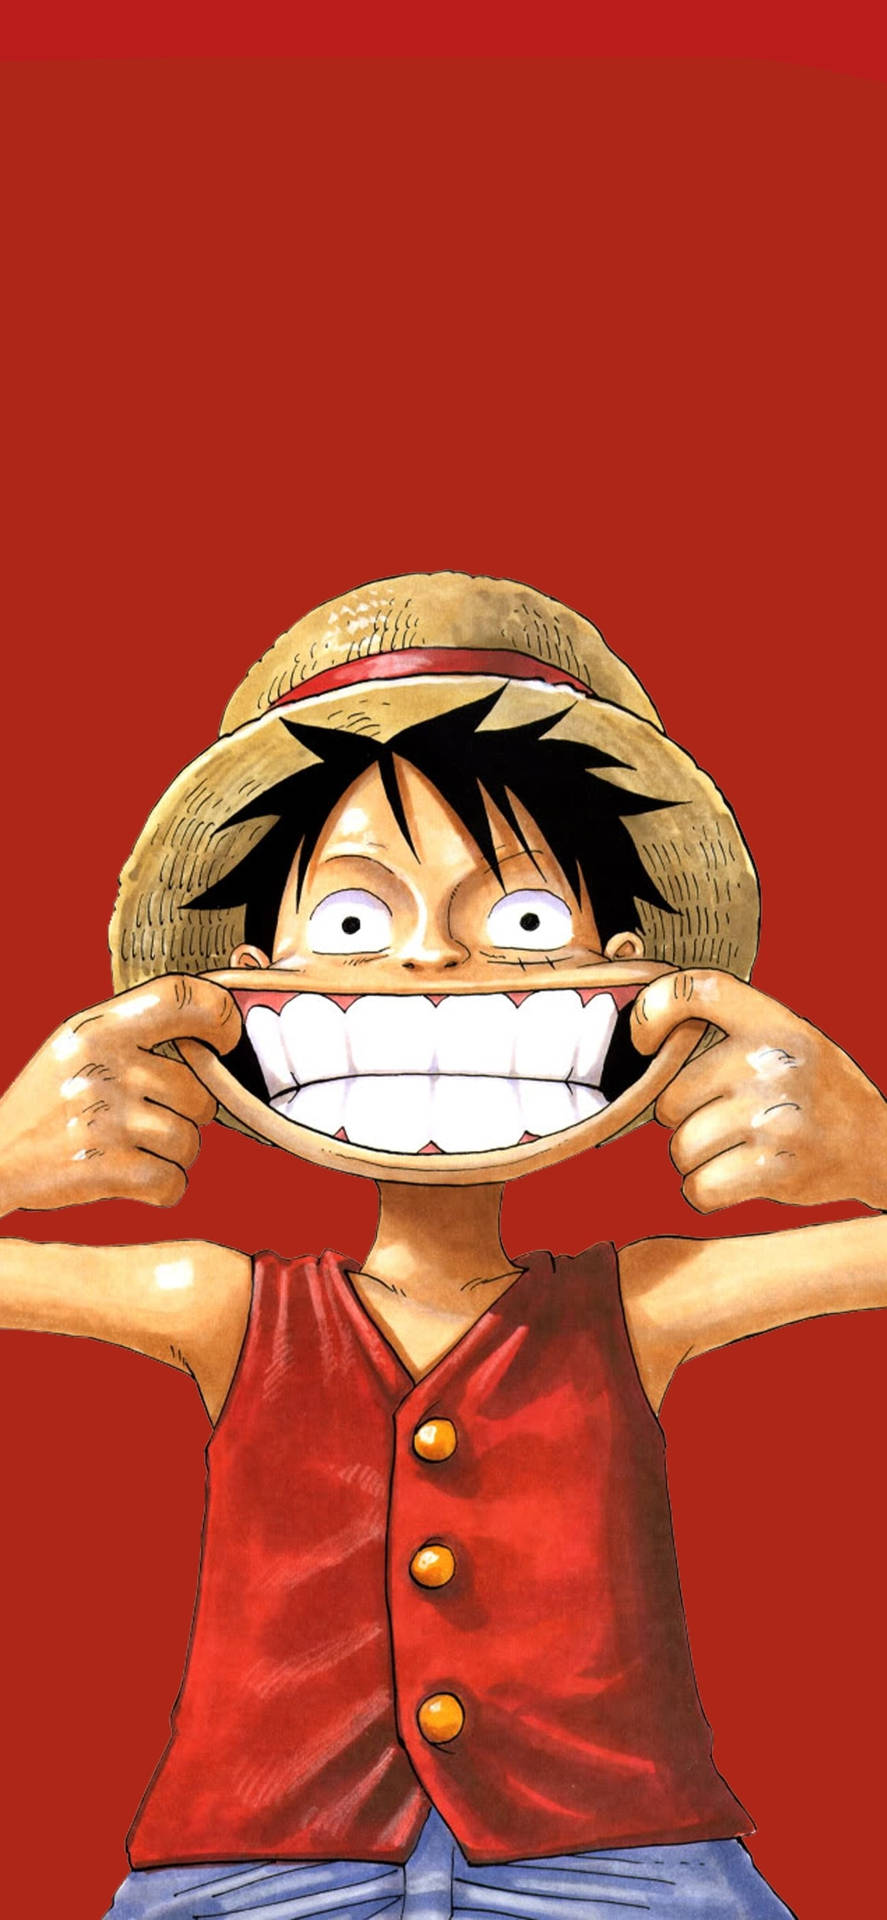 Download wallpaper 1280x2120 pirate monkey d luffy one piece anime big  smile iphone 6 plus 1280x2120 hd background 27595